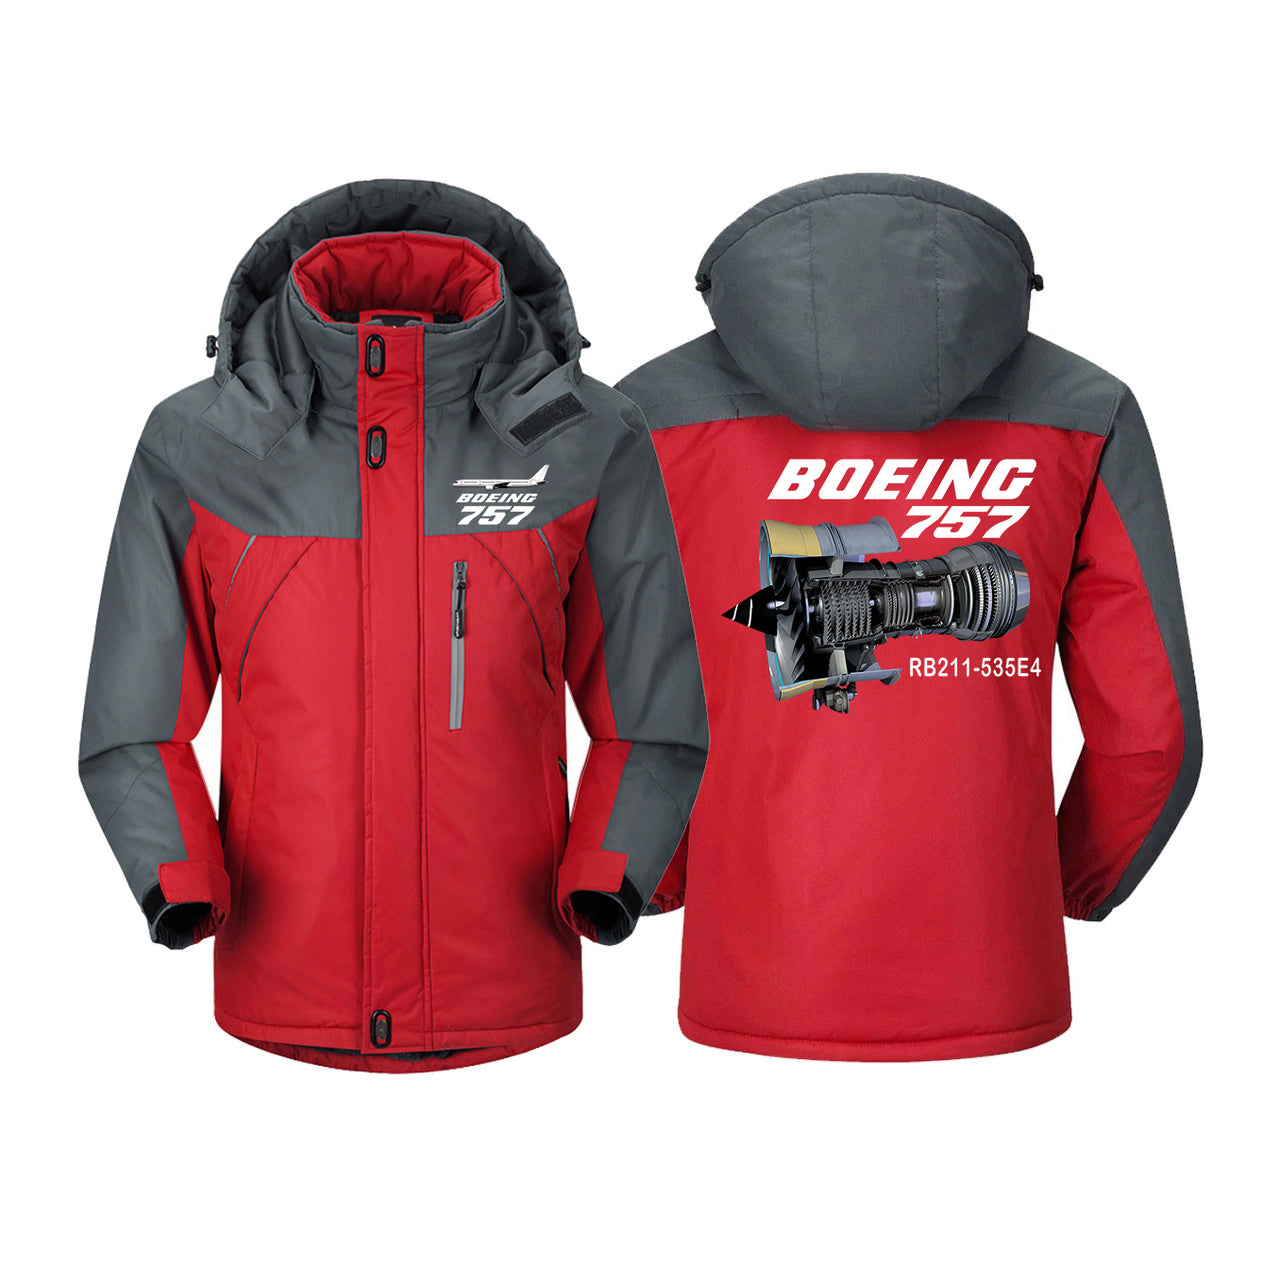 Boeing 757 & Rolls Royce Engine (RB211) Designed Thick Winter Jackets